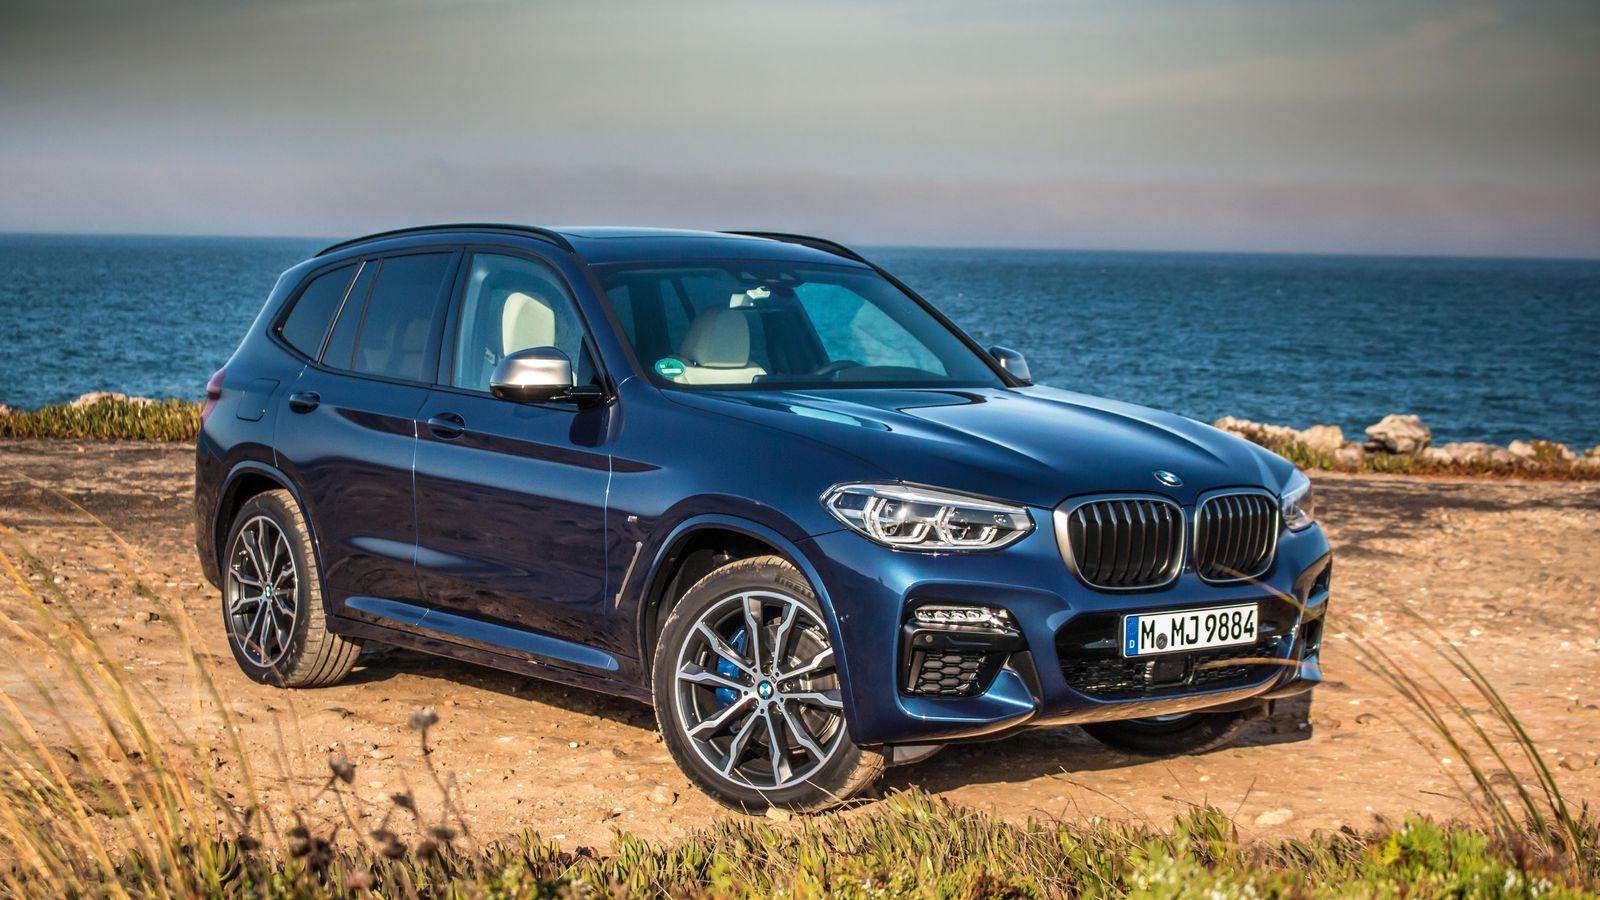 BMW X1 VS X3 Which one is the Best Buy?